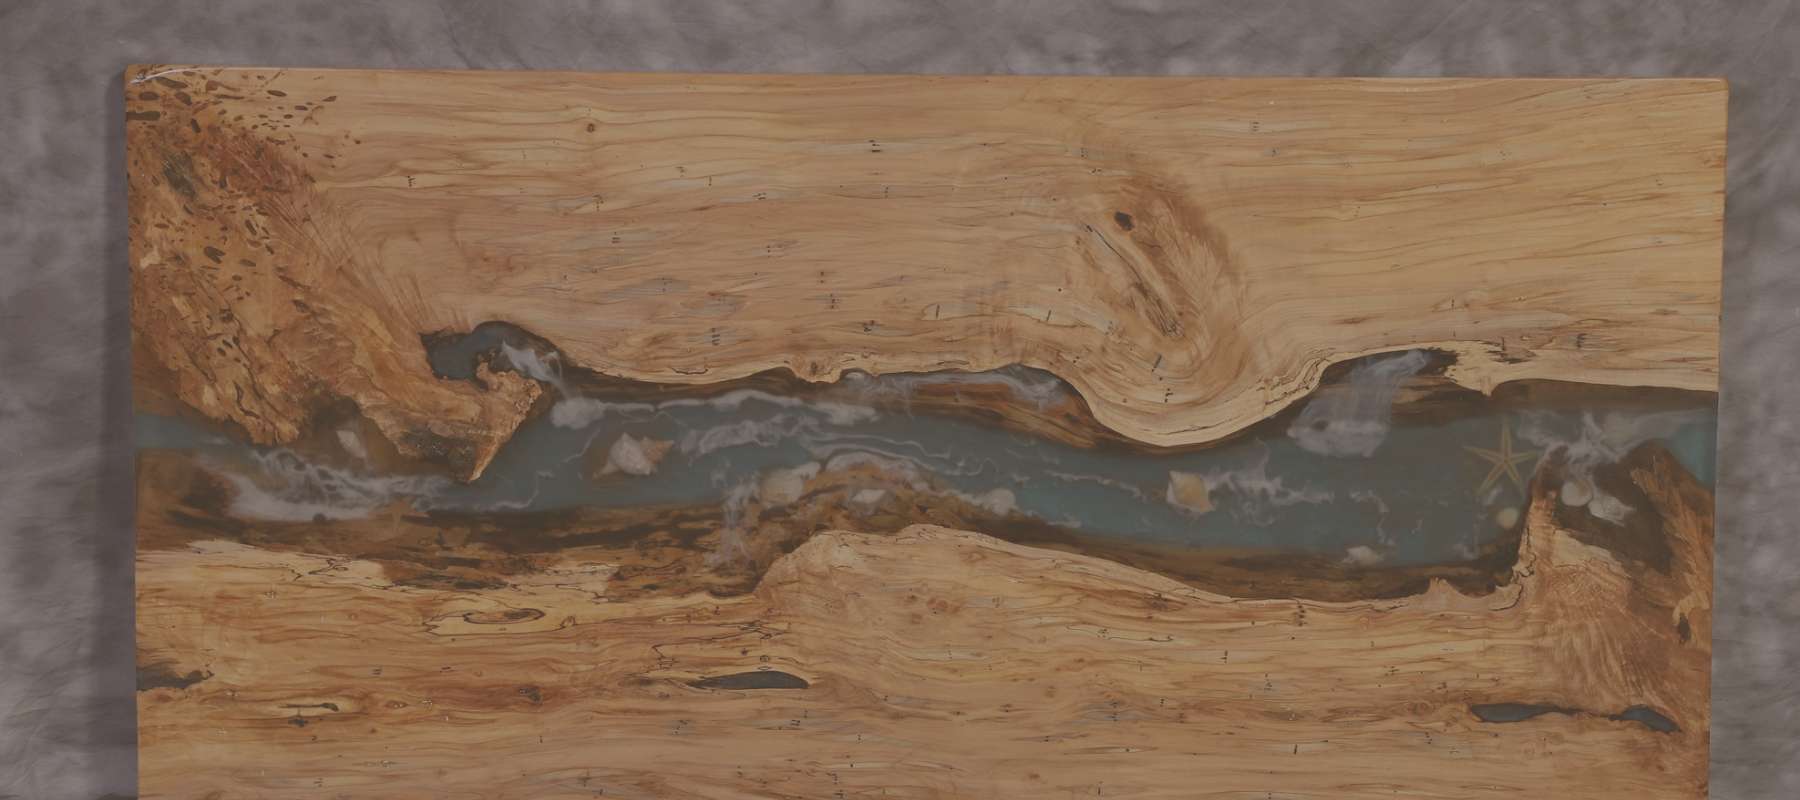 Epoxy Live Edge Tables: How to make one - snyders.furniture